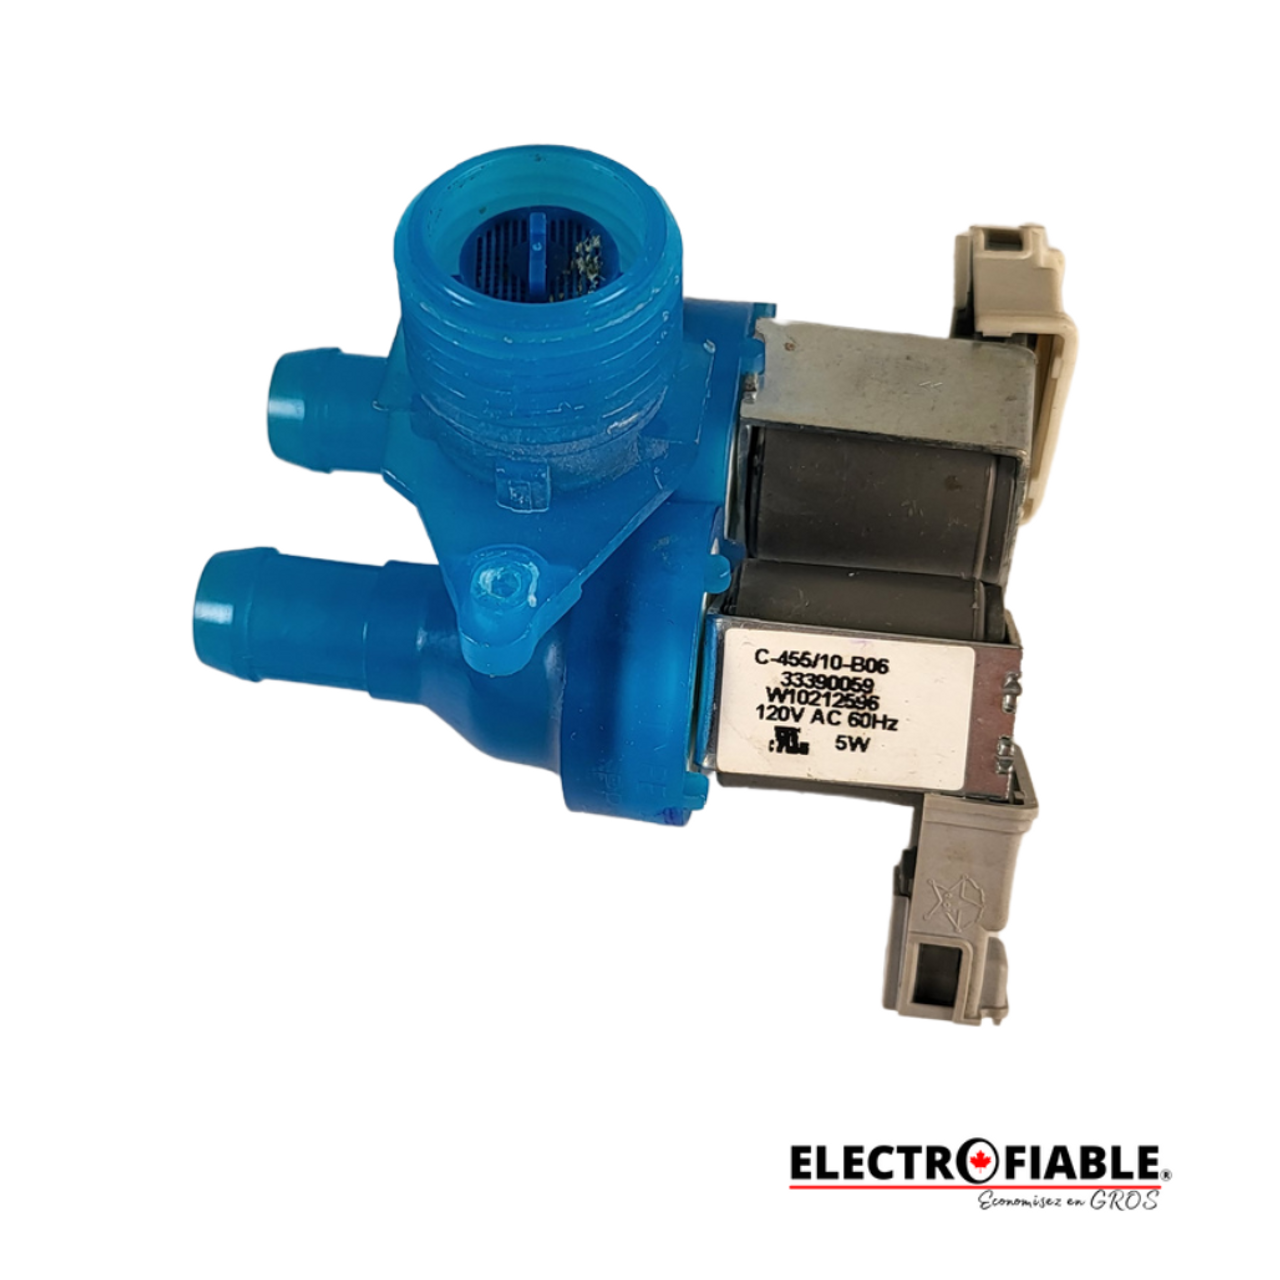 WPW10212596 Water inlet valve for Whirlpool washer